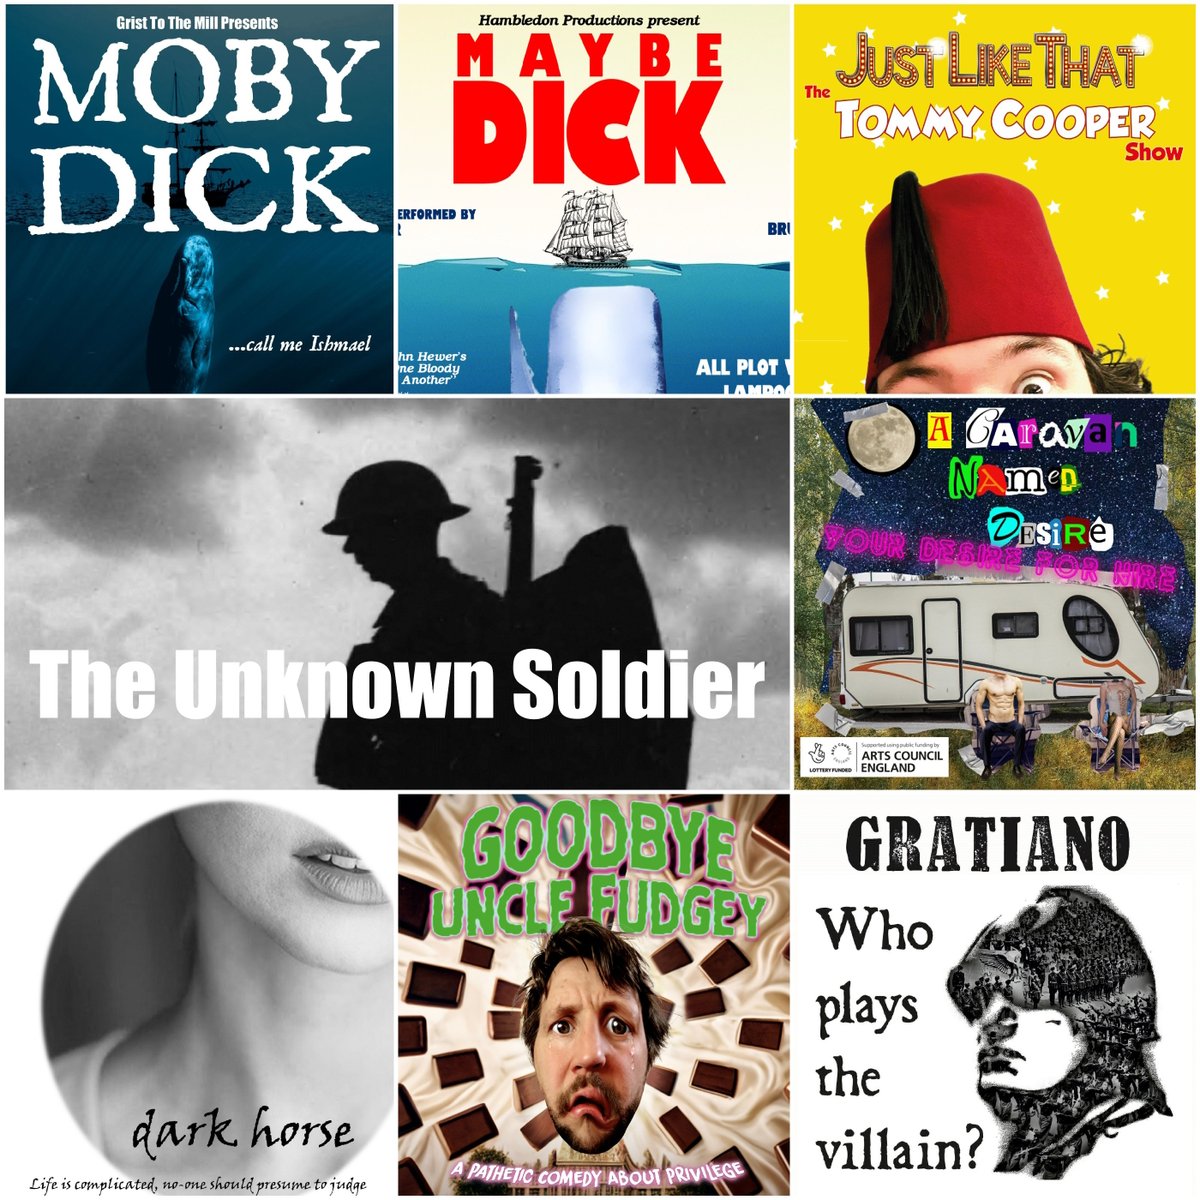 Classics to New-writings: 
#TommyCooper show & #MaybeDick @HambledonProds; 
Award-winning #UnknownSoldier, #Shakespeare #Gratiano & #MobyDick; 
#ACaravanNamedDesire - awarded “Exciting work” @FringeReview  ;
@GoodbyeFudgey on privilege; & #DarkHorse
rotundatheatre.com/buxton-fringe-…